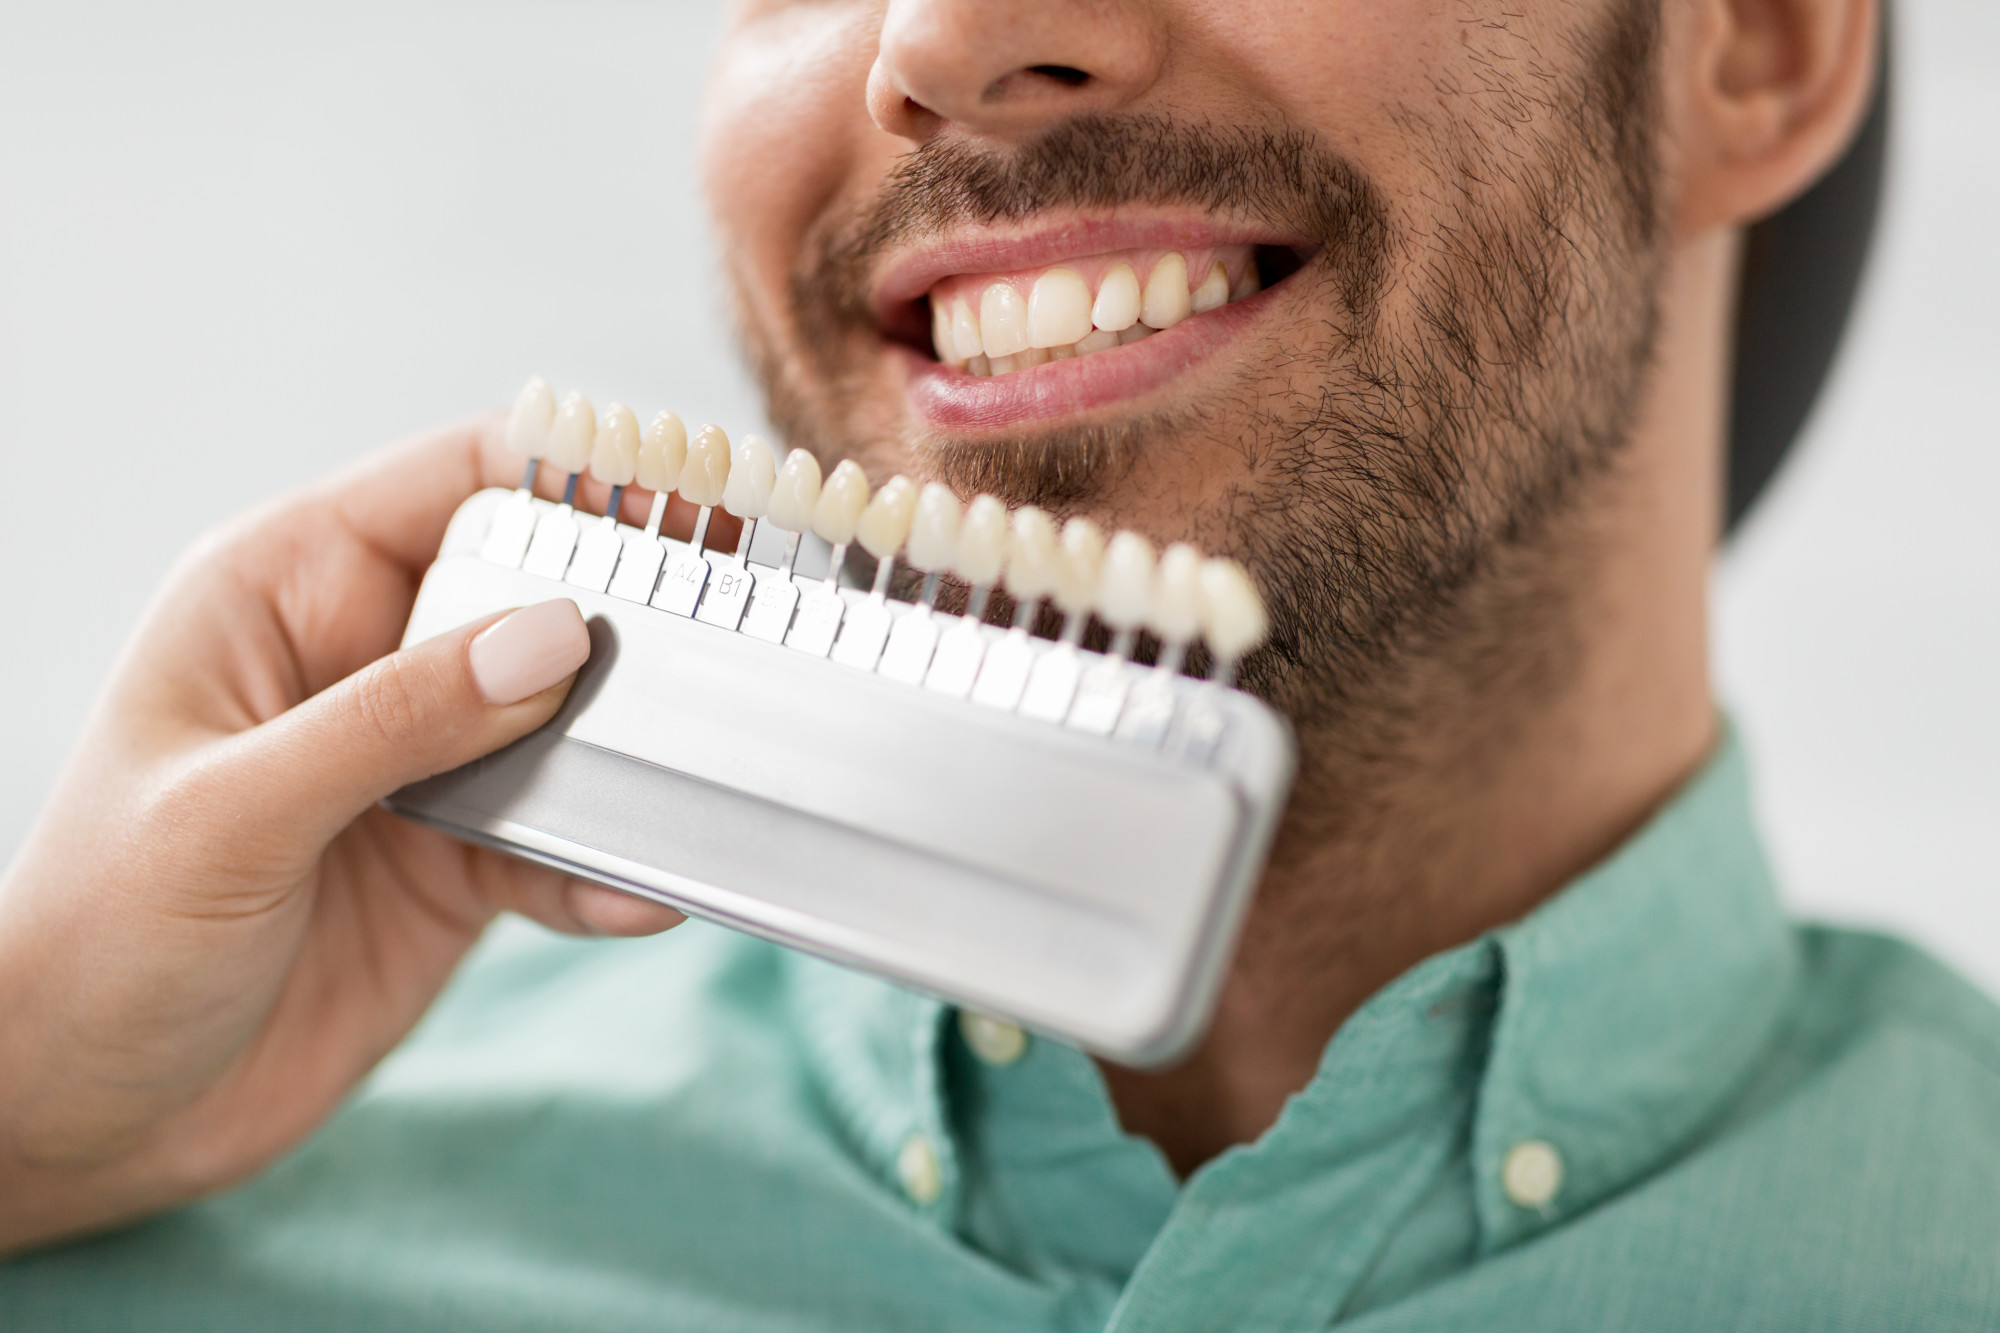 Are you thinking about getting dental veneers? Here's everything you need to know about dental veneers, including the core benefits.